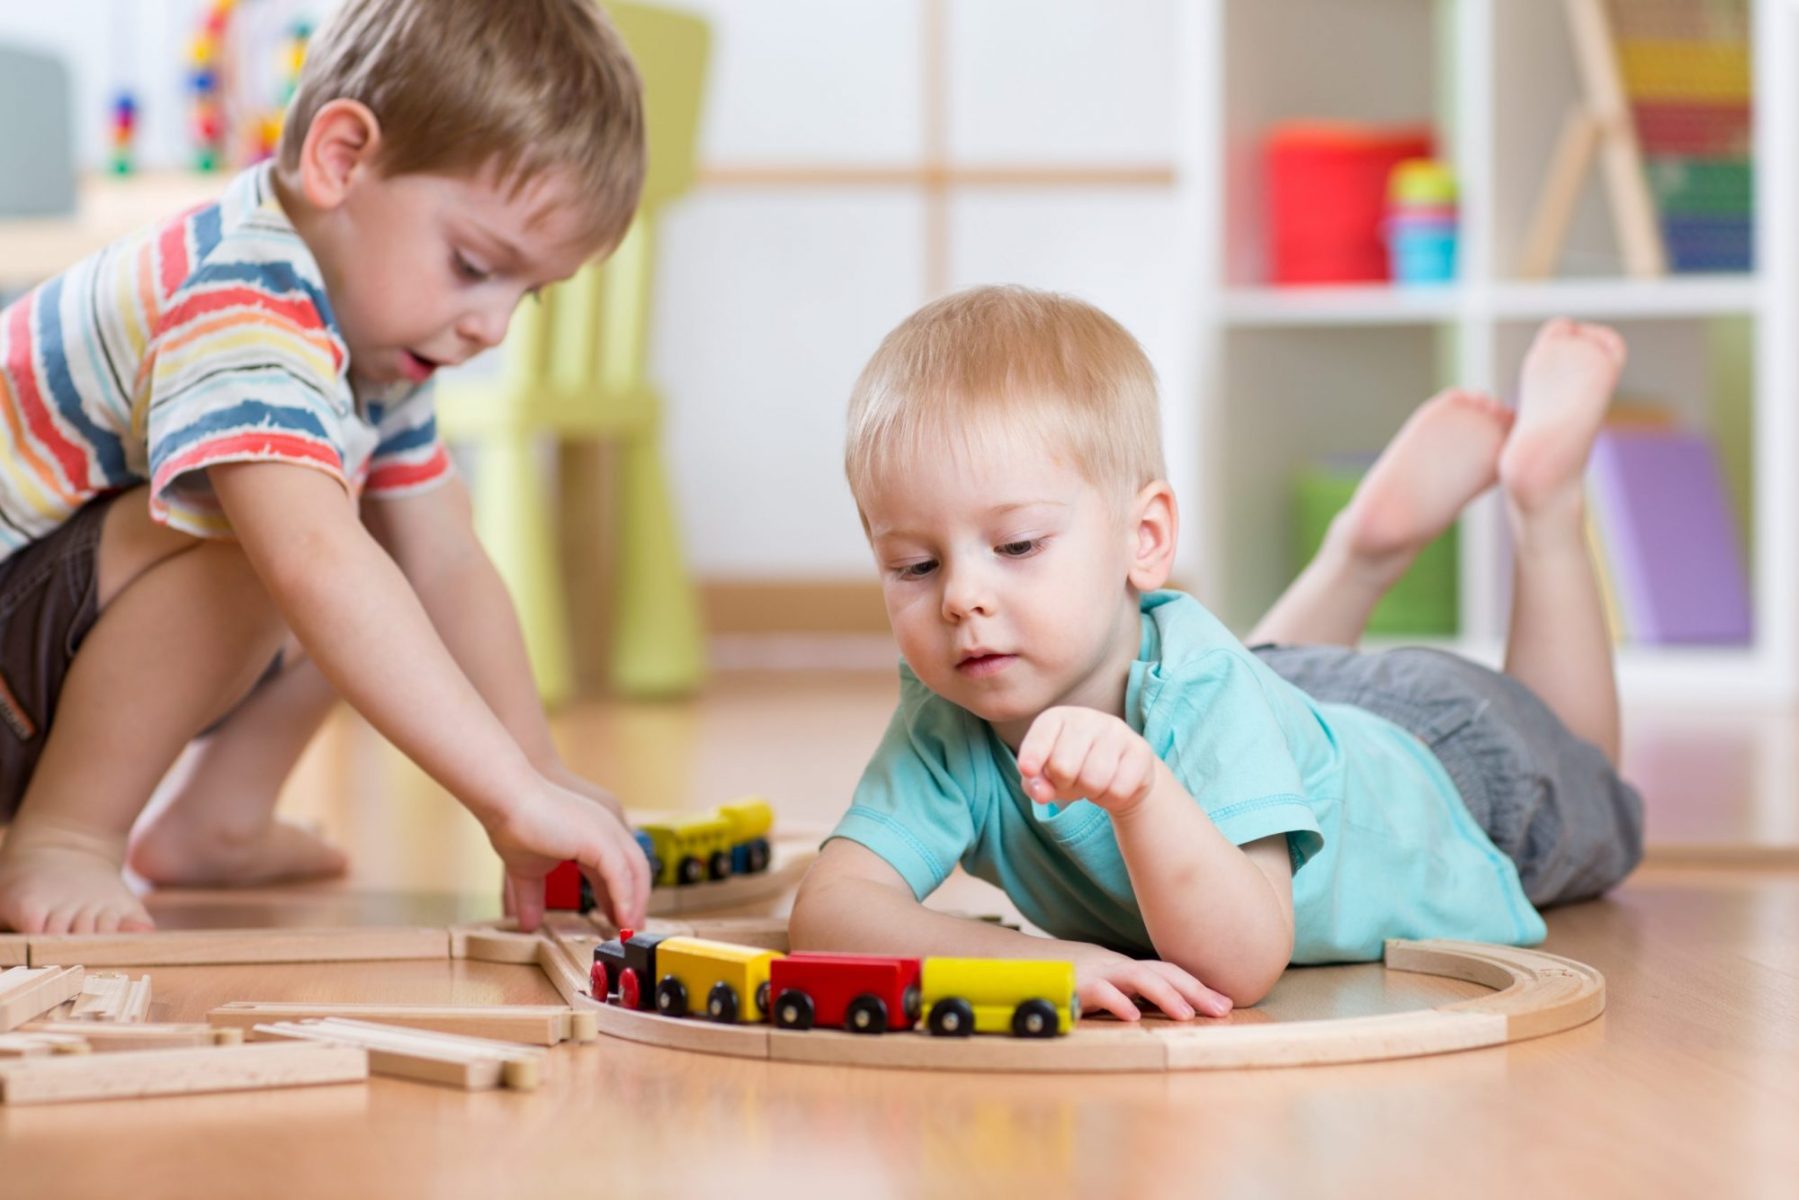 Two small boys playing on floor with toy train, when needing to develop a fair parenting plan meet with Lombard child custody attorney before meeting with a judge.